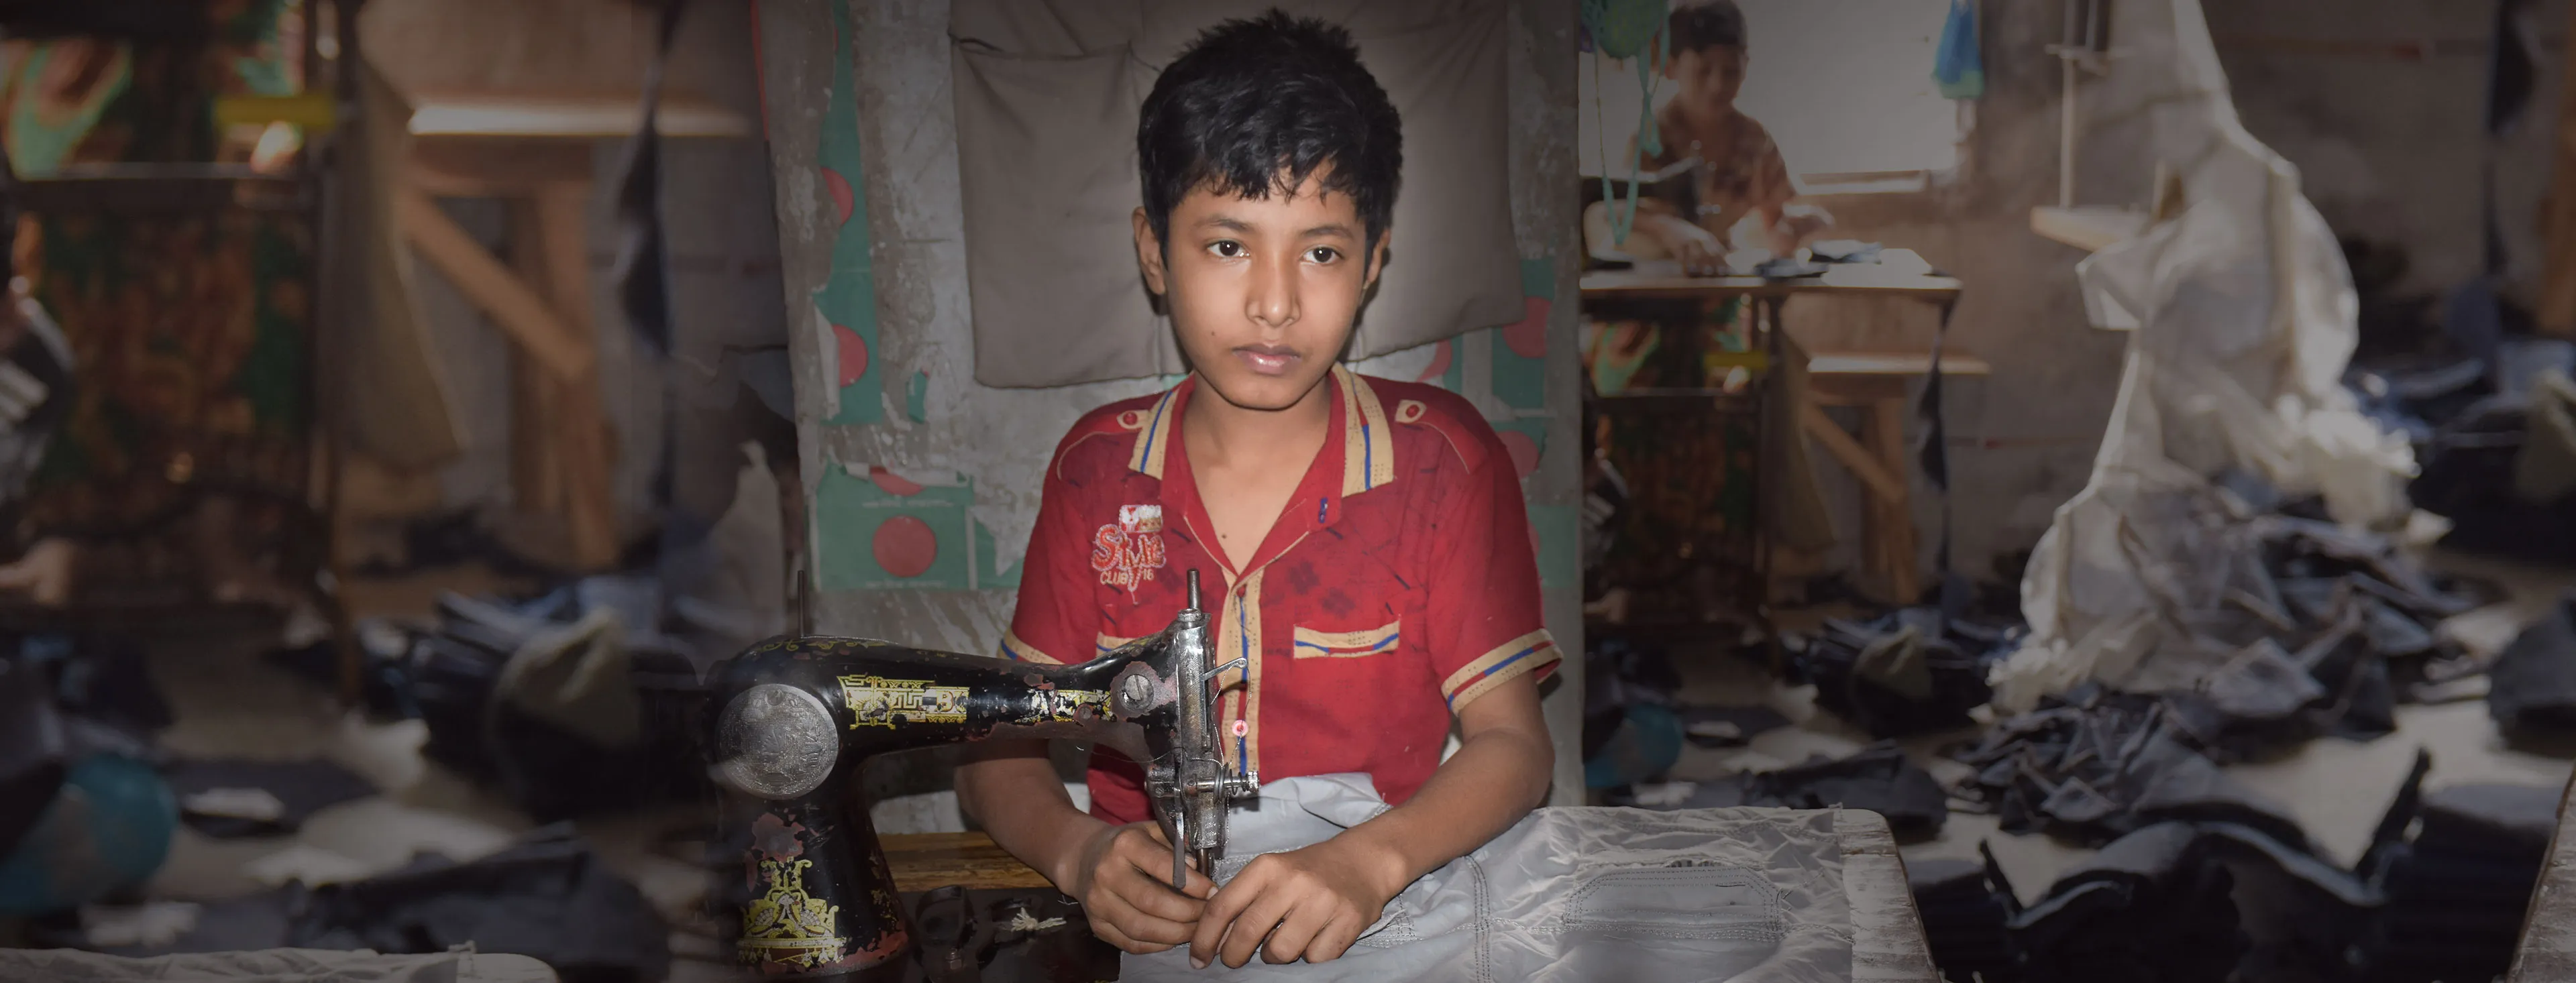 Child Labor in Subcontracted Ready-Made Garment Supply Chains in Bangladesh: From Impact Assessment to Holistic Due Diligence